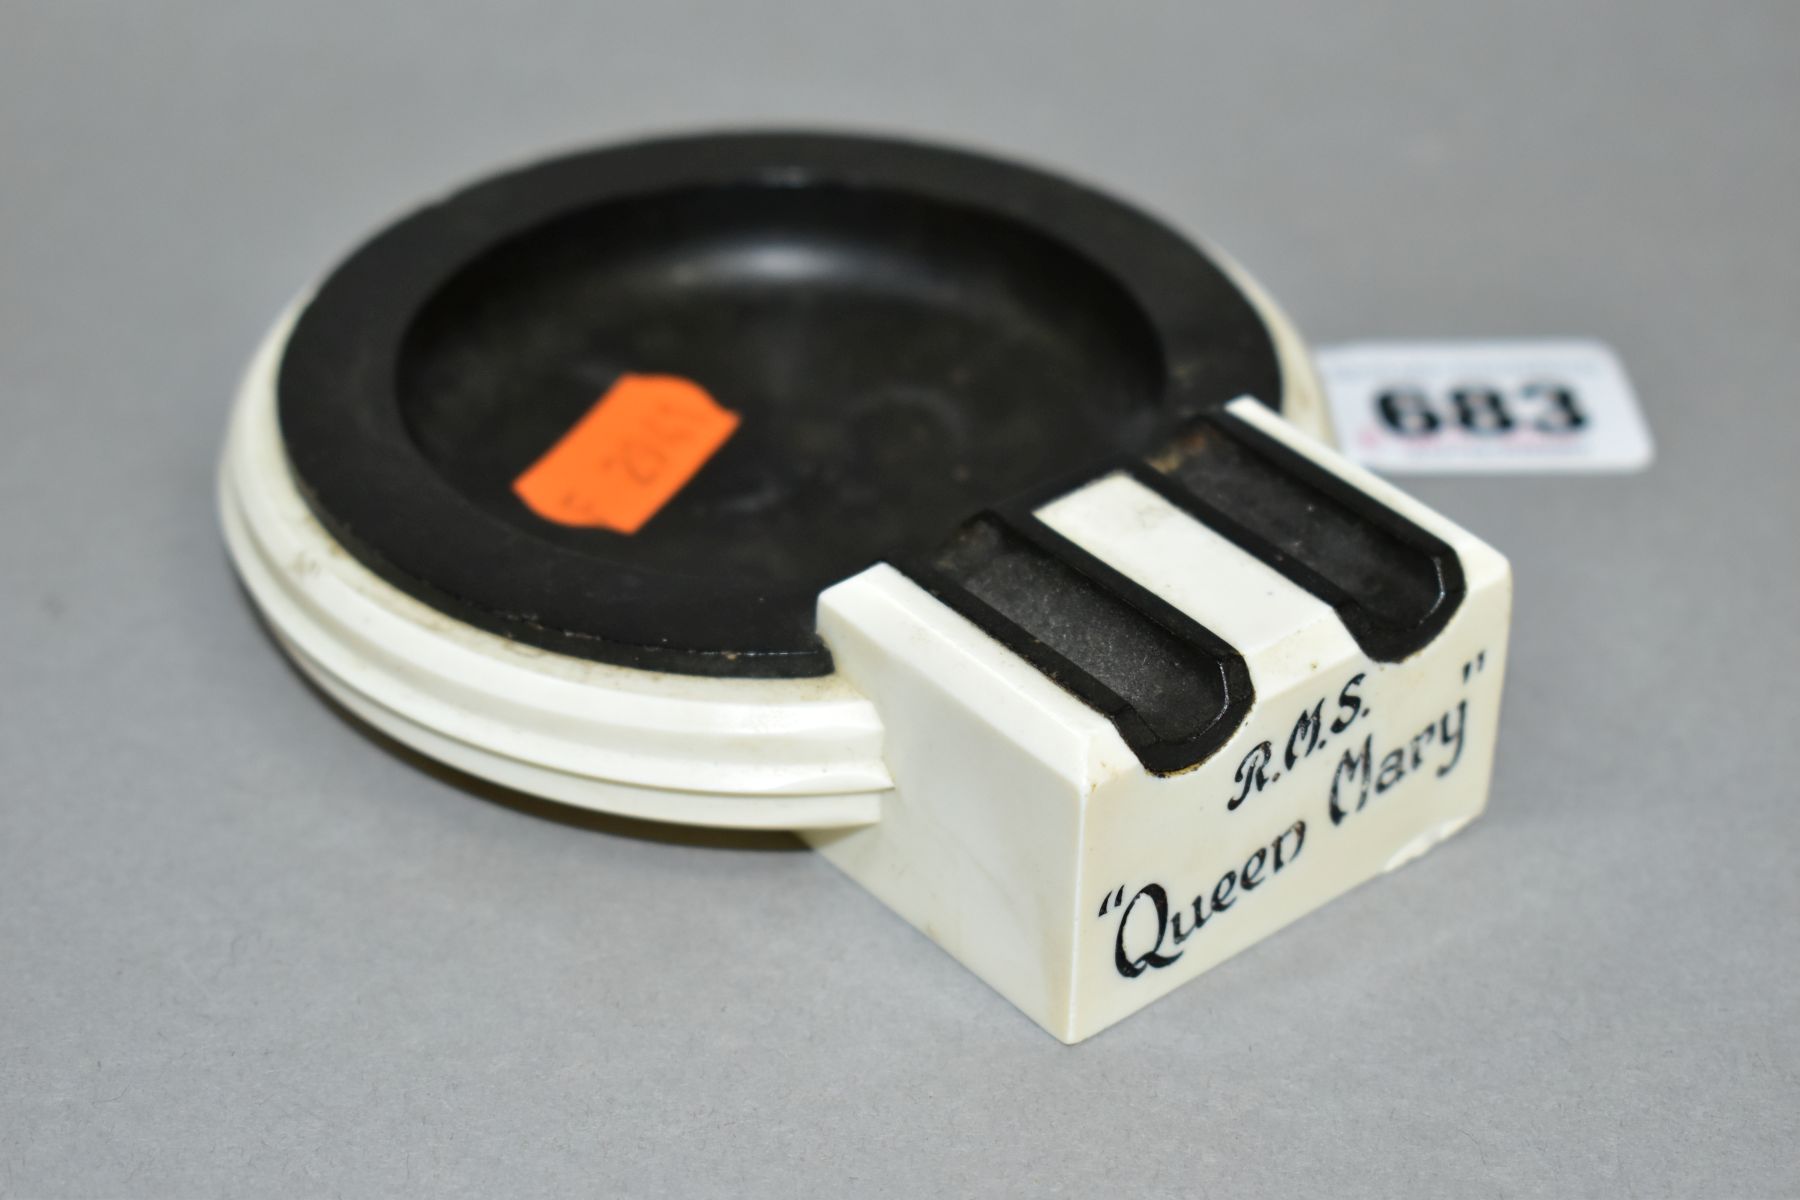 AN ART DECO BAKELITE RMS QUEEN MARY ASHTRAY, in cream and black, with RMS Queen Mary marked on one